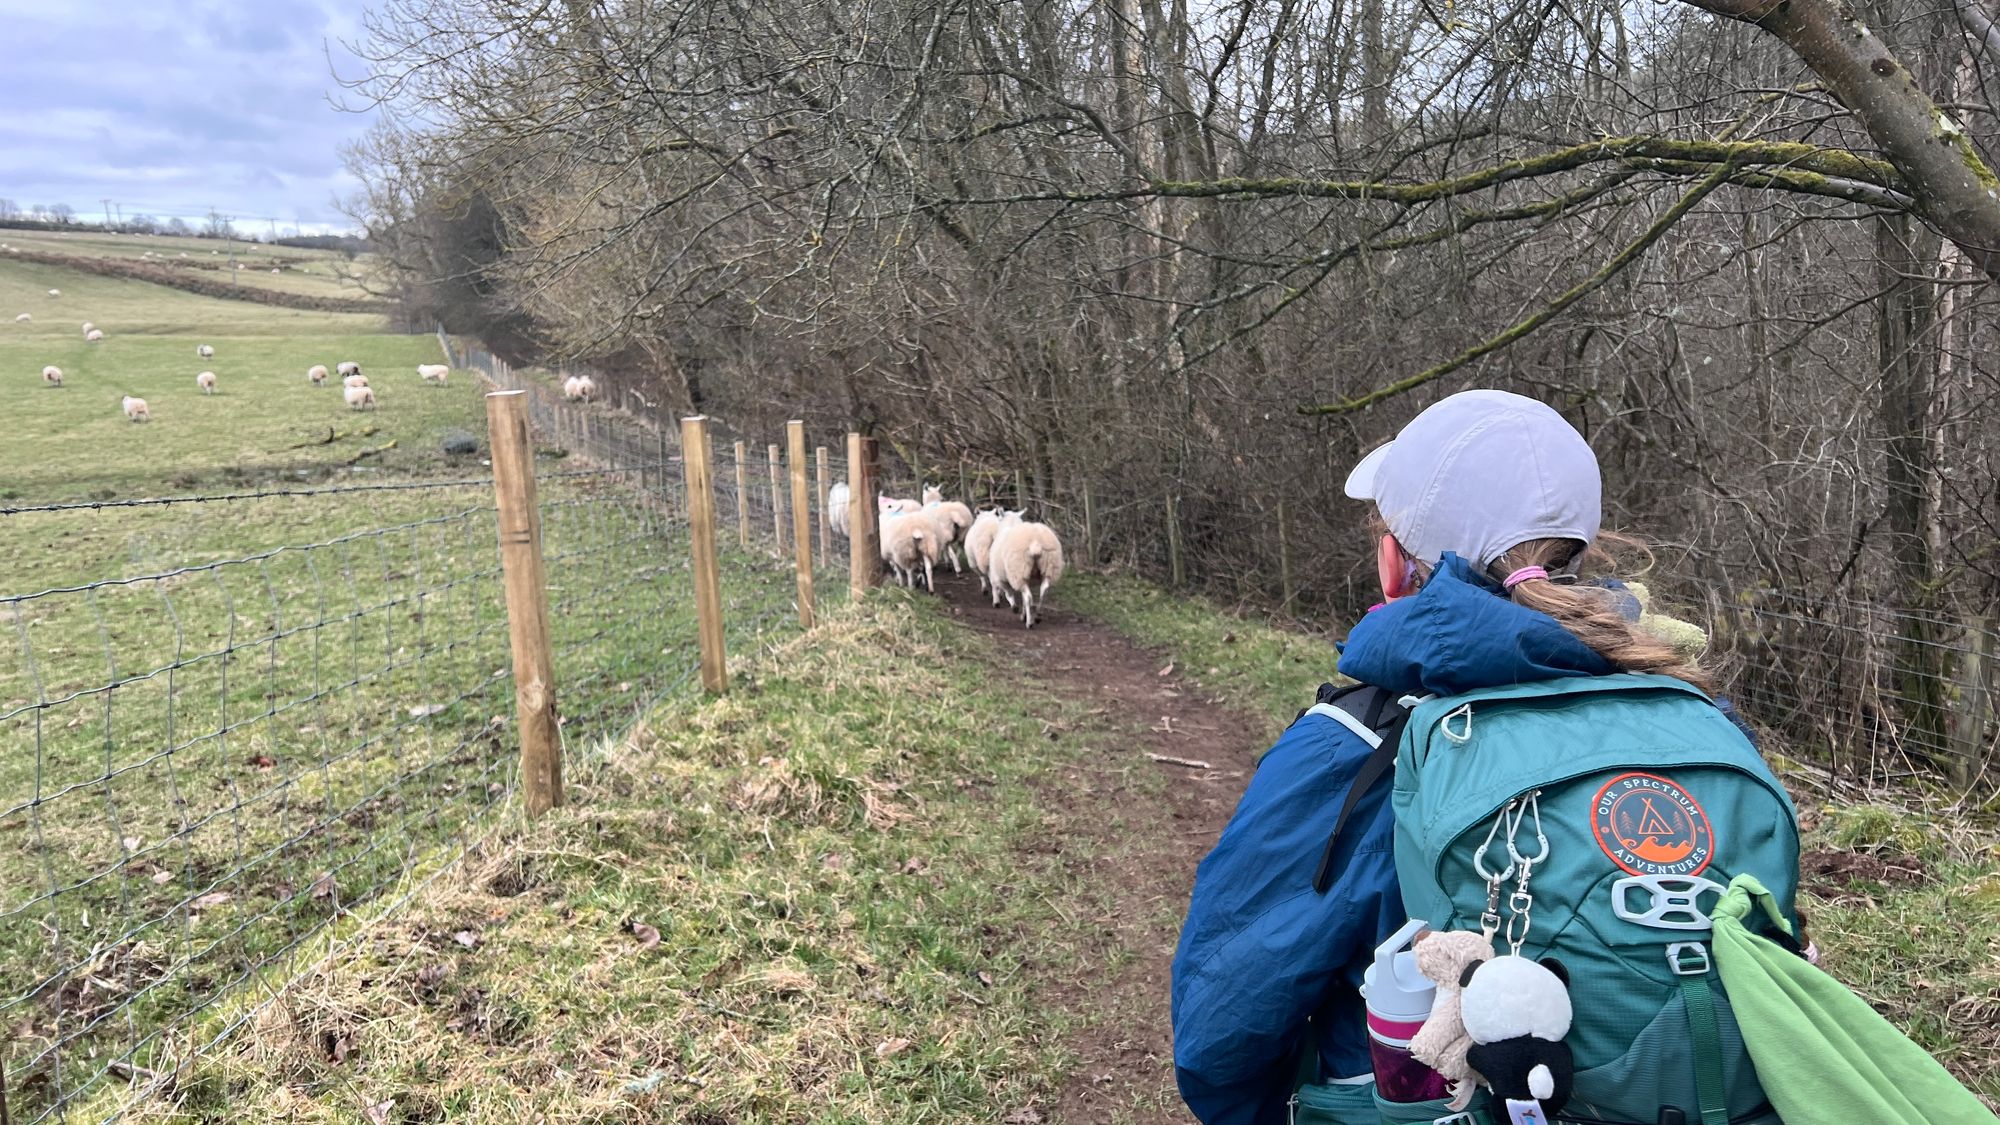 Following some sheep on the trail I struggled to keep up with Eve